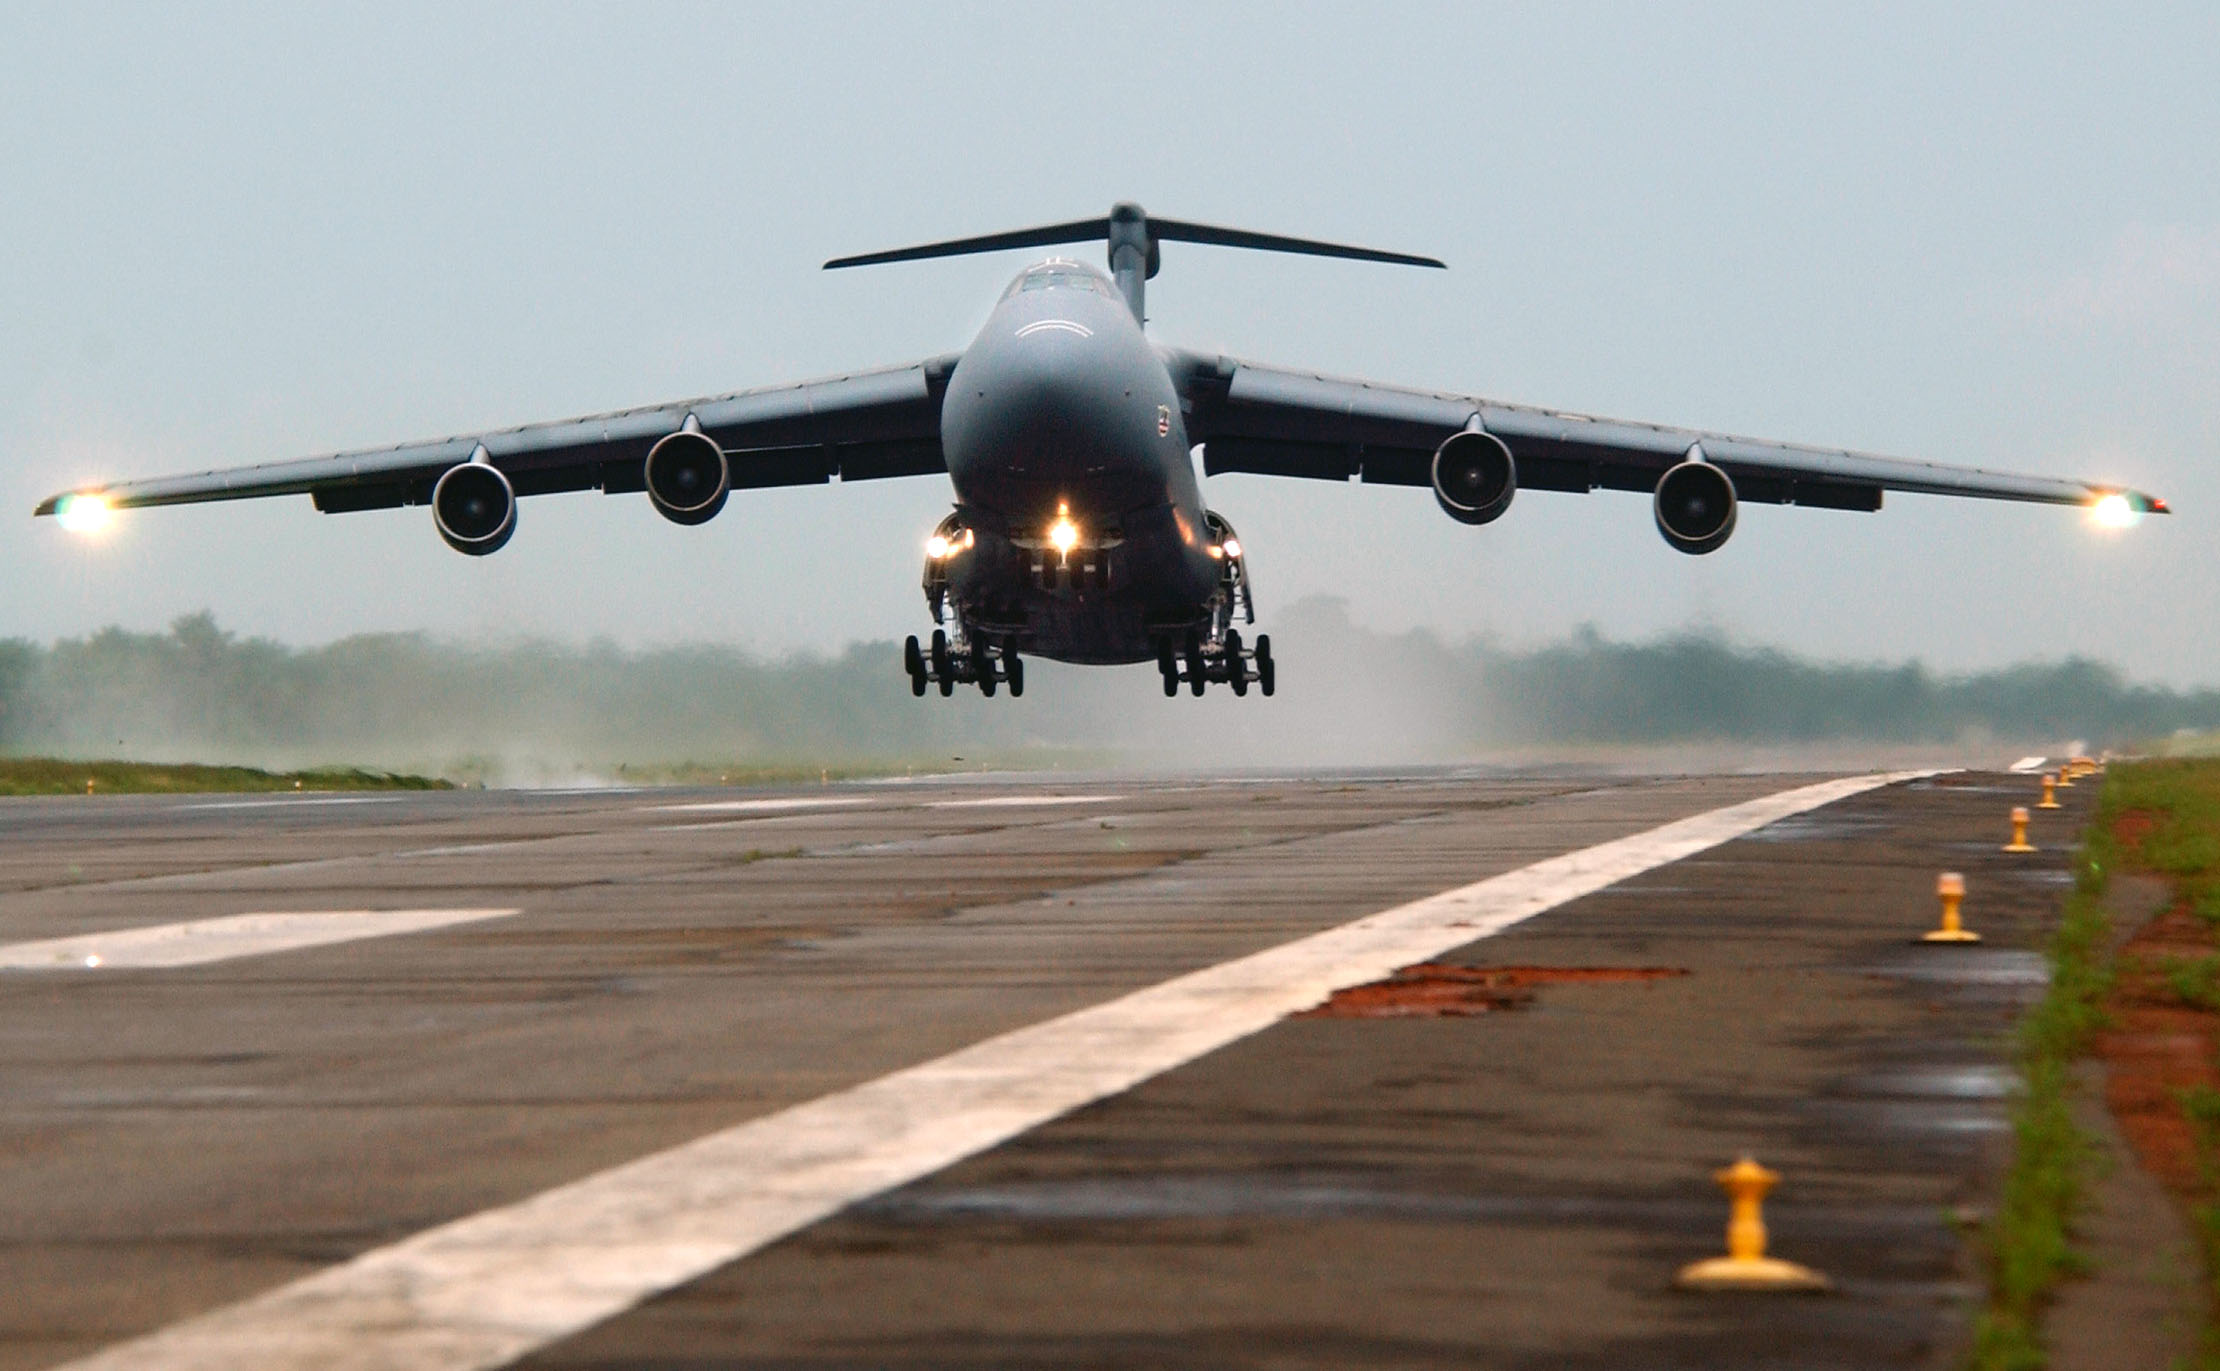 A C-5 Galaxy taking off from the Travis Air Force Base, California. Image via U.S. Air Force/Tech. Sgt. Justin D. Pyle